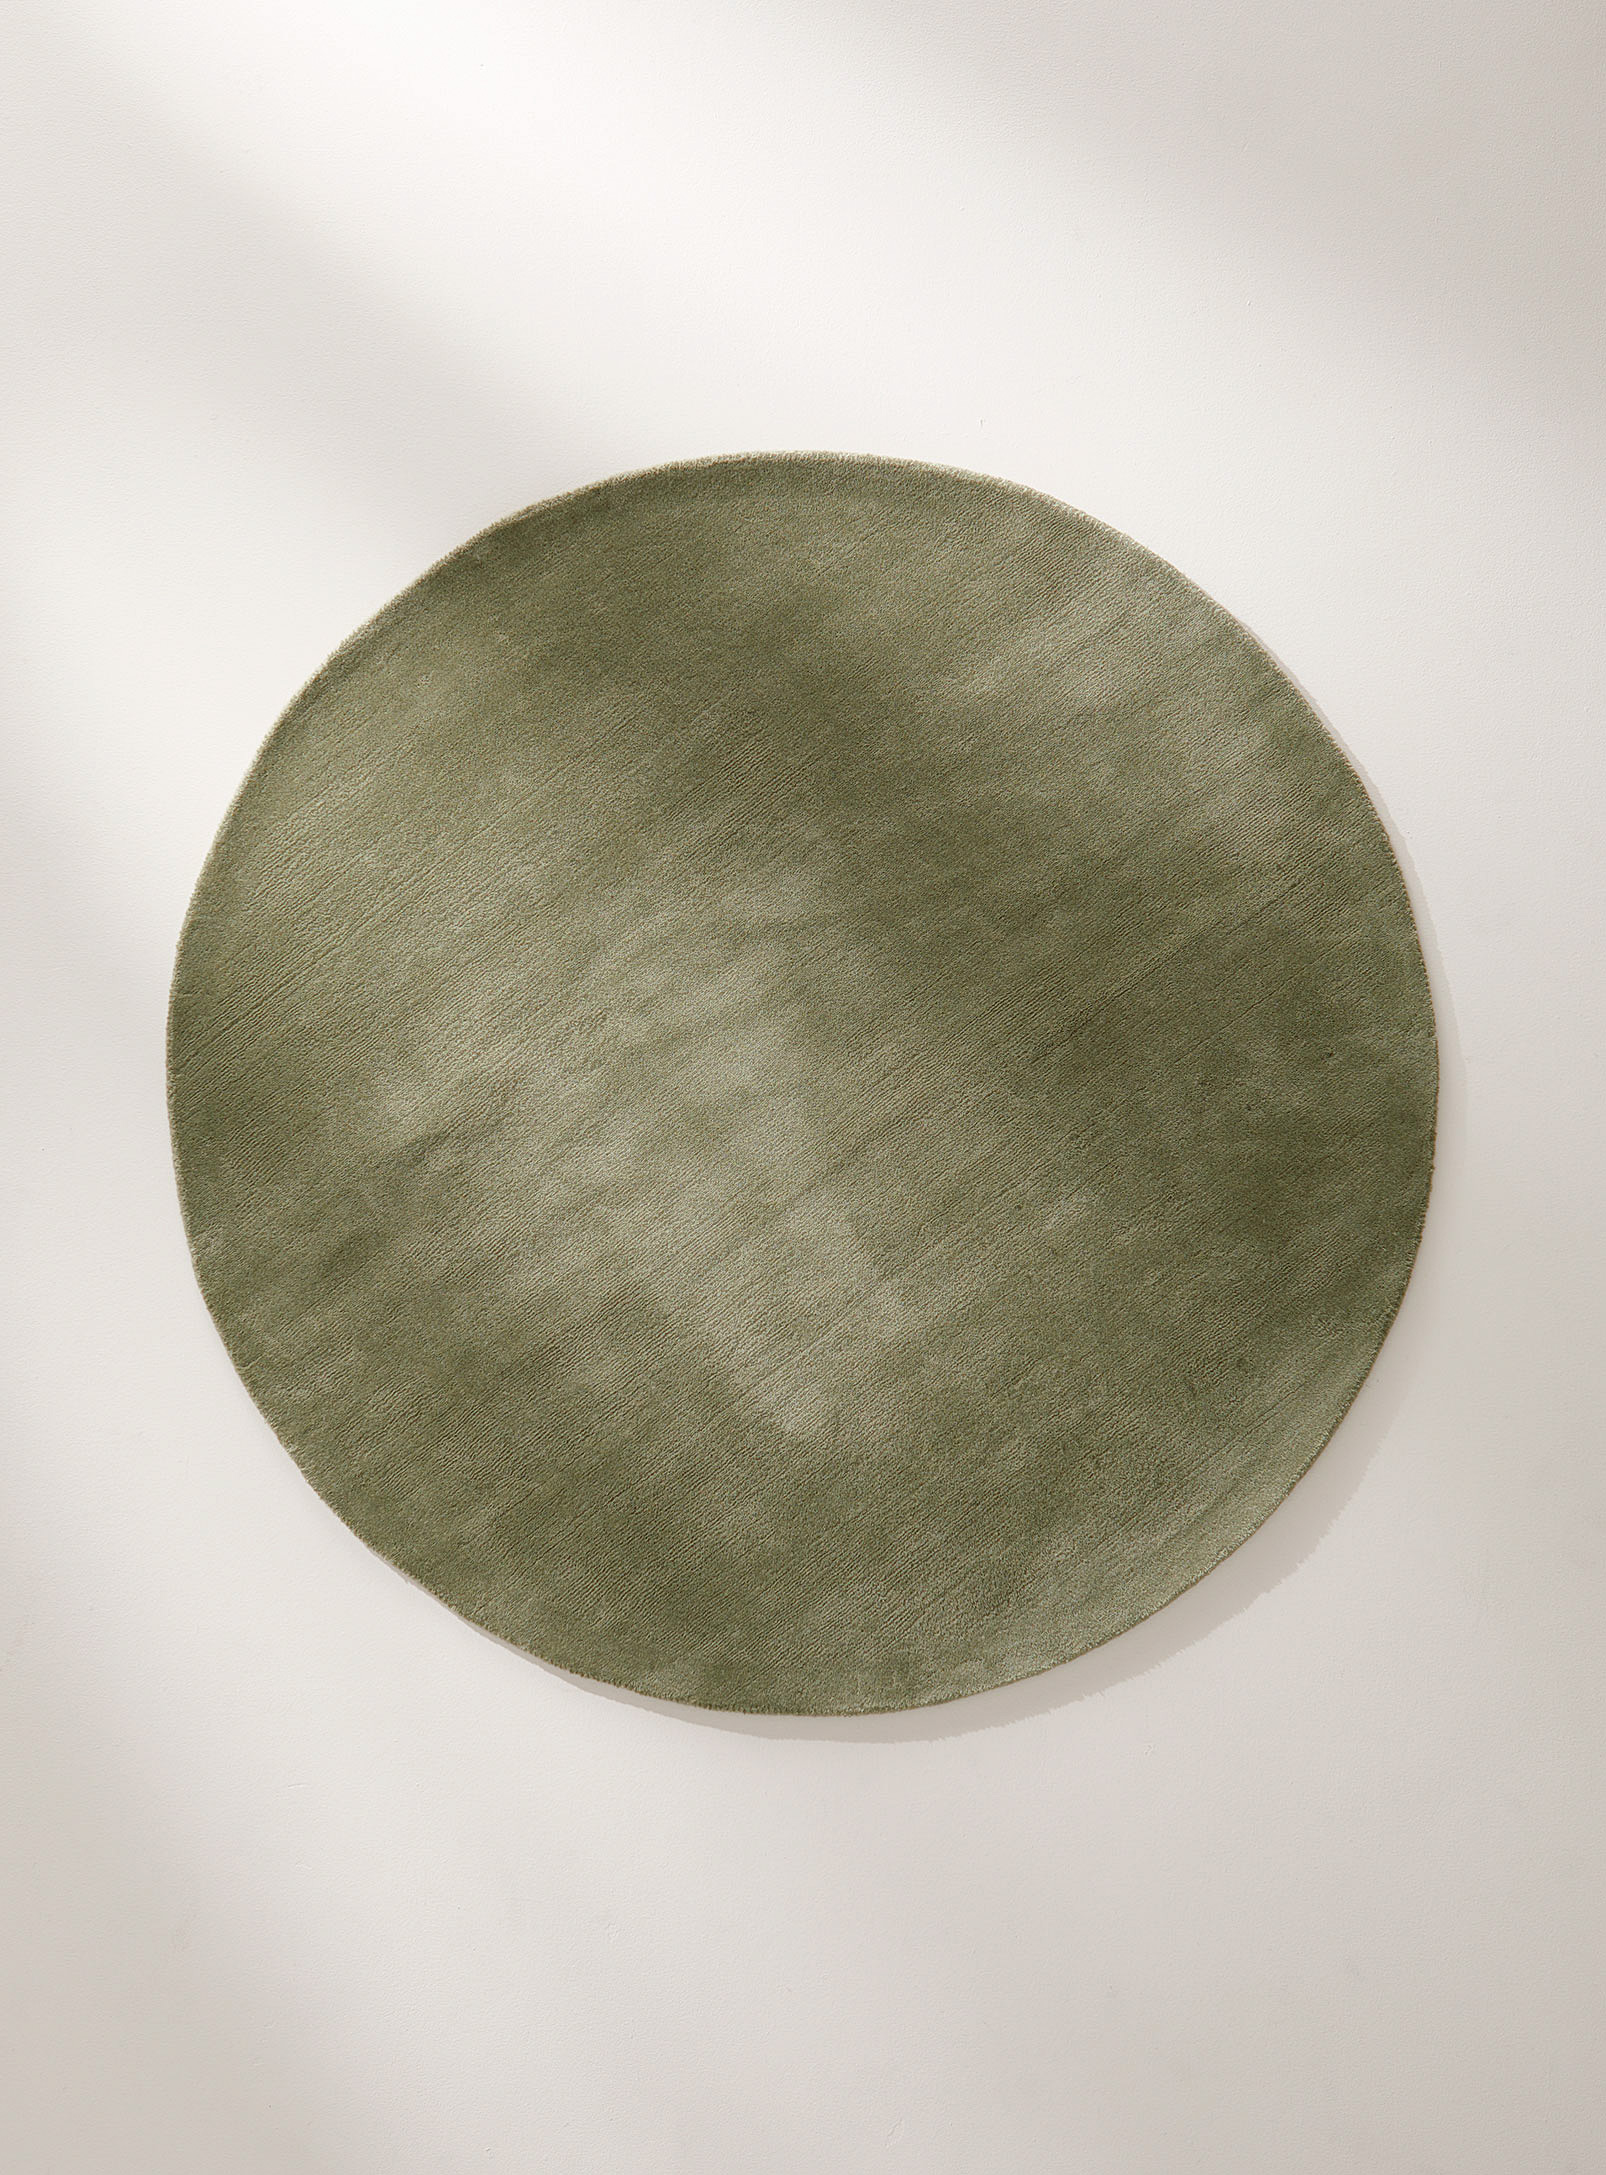 Simons Maison Tufted Wool Round Rug See Available Sizes In Khaki